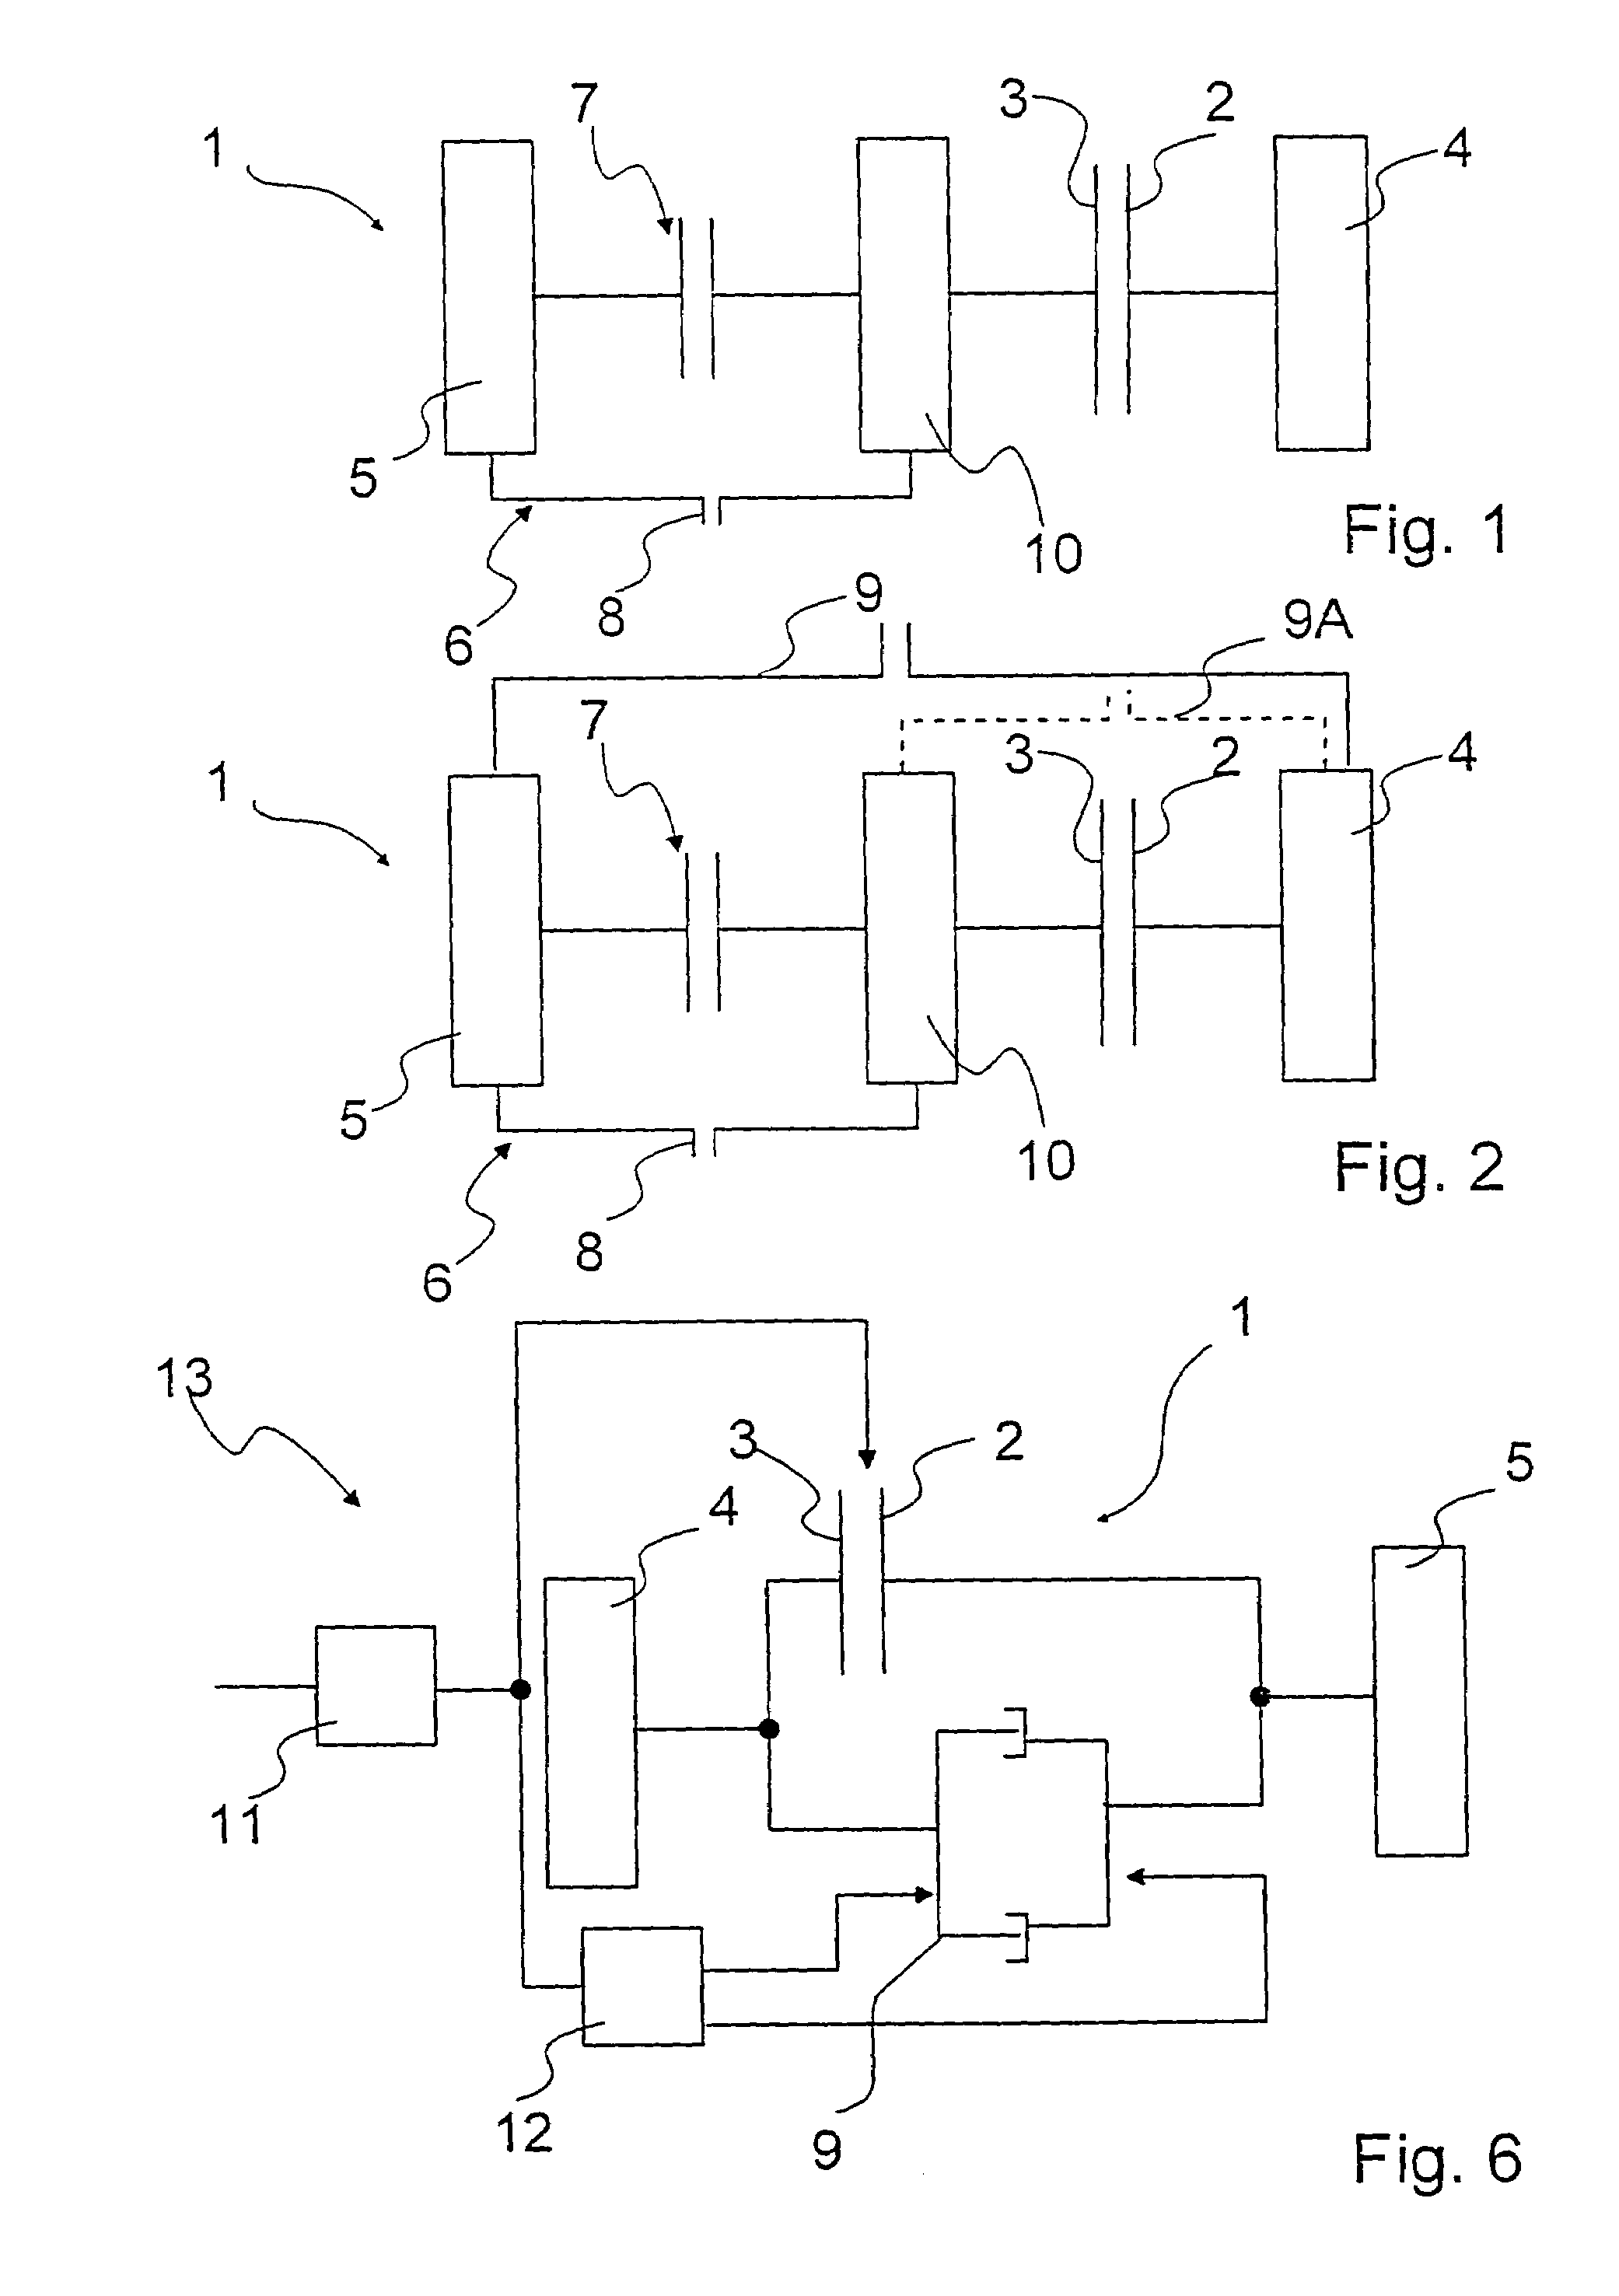 Transmission and method for controlling a transmission with at least one shift control element